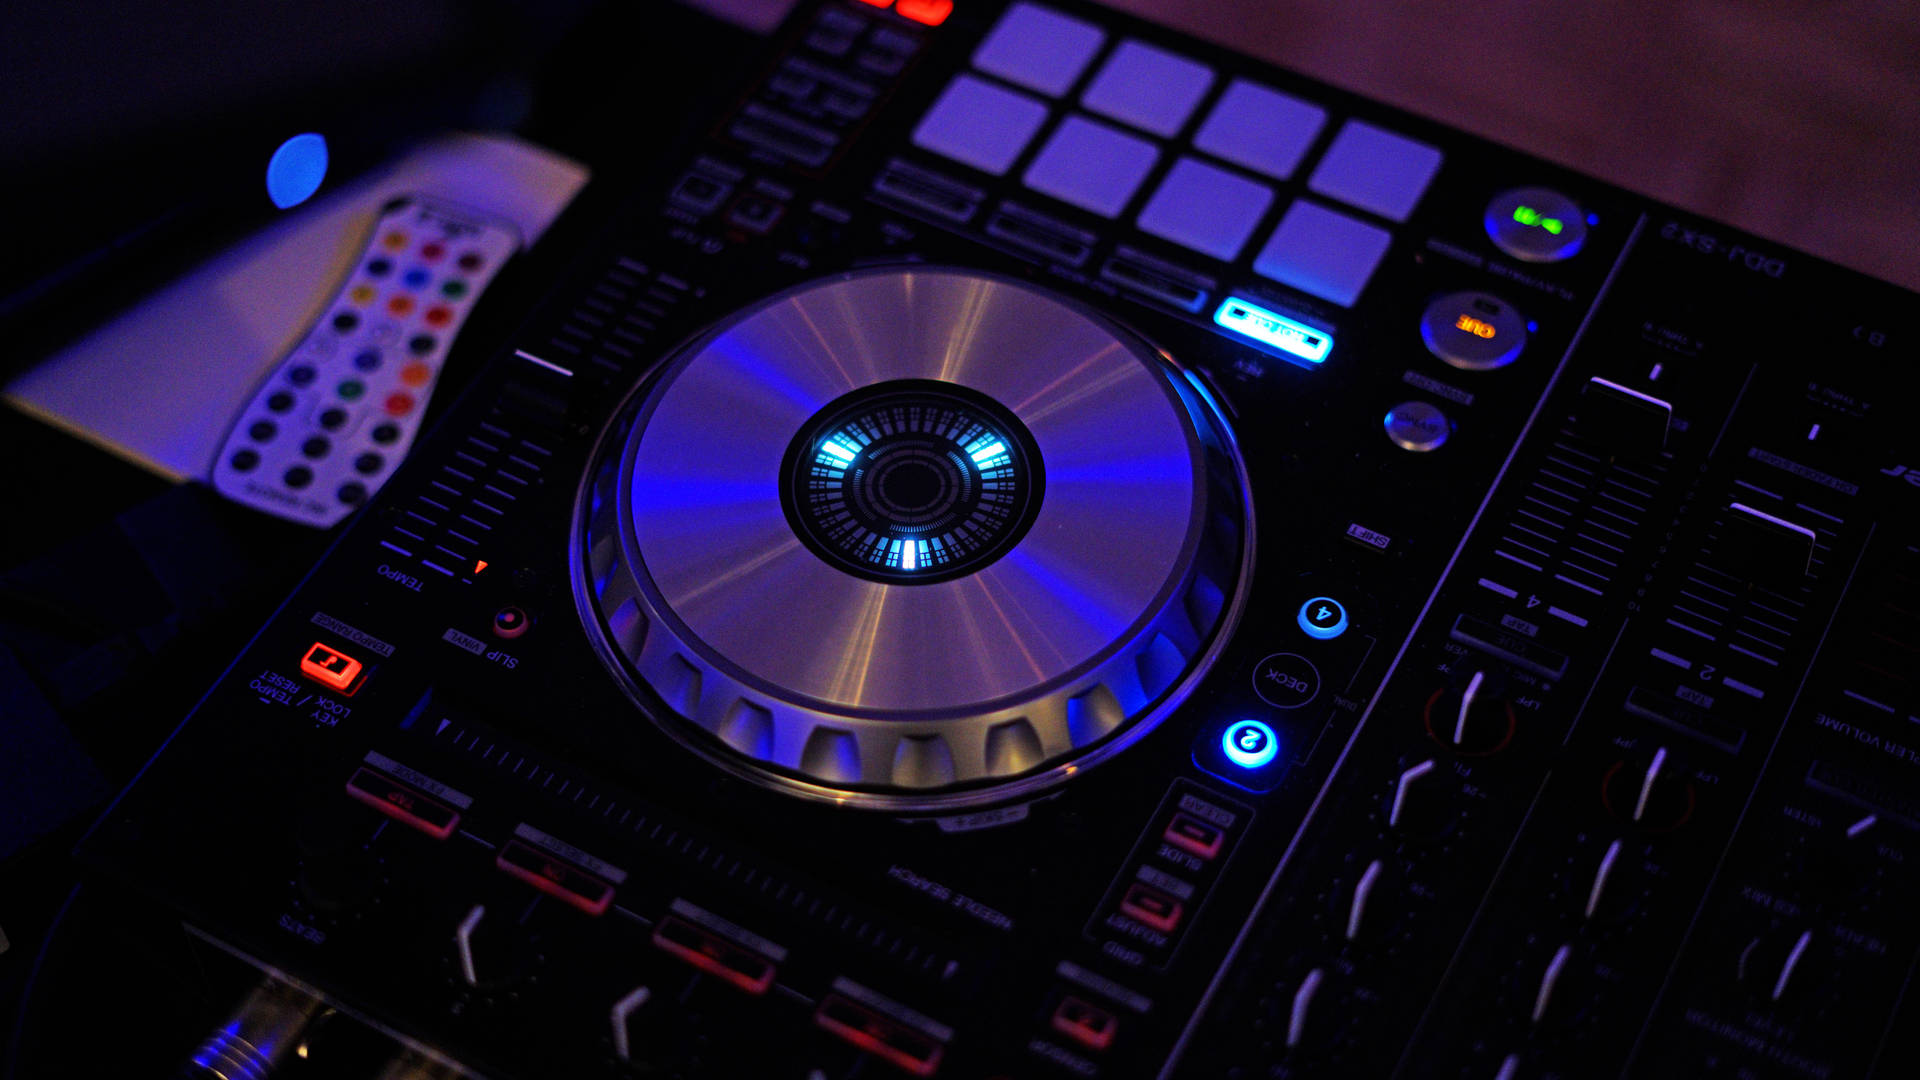 Dj 7952X4472 Wallpaper and Background Image